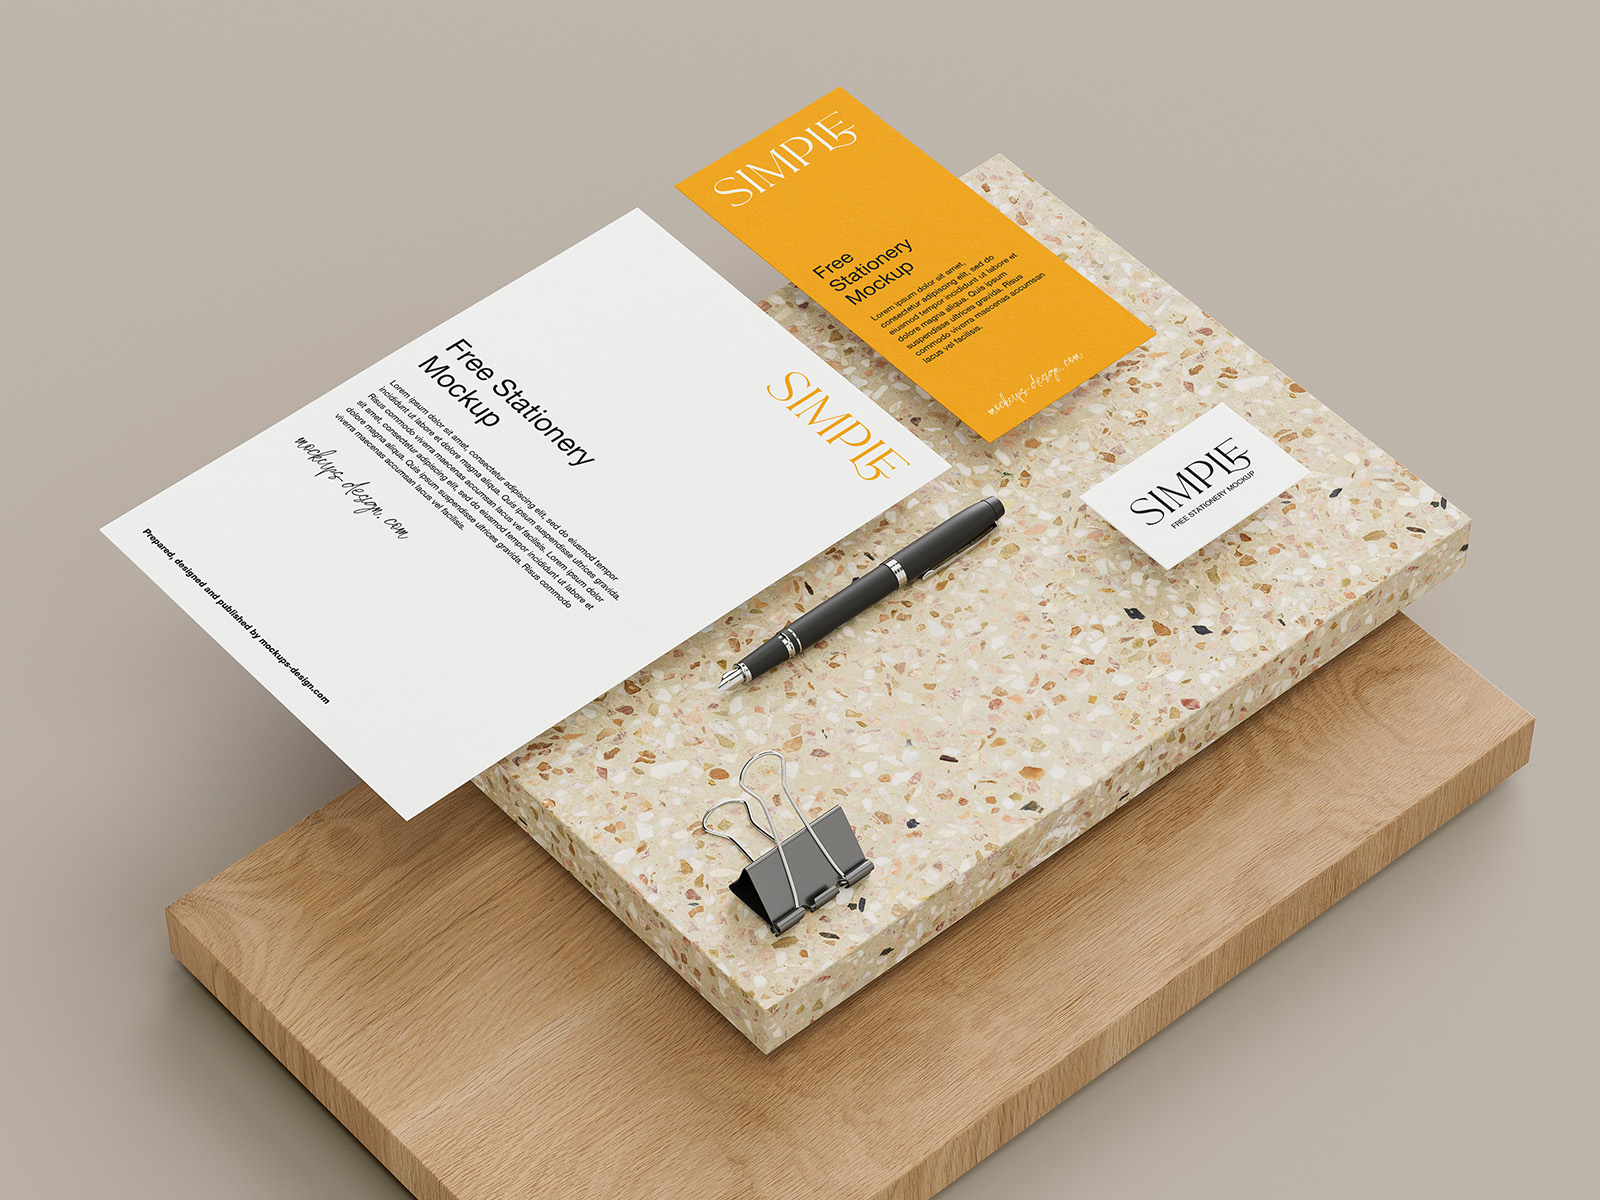 Stationery with wood and stone tiles mockup